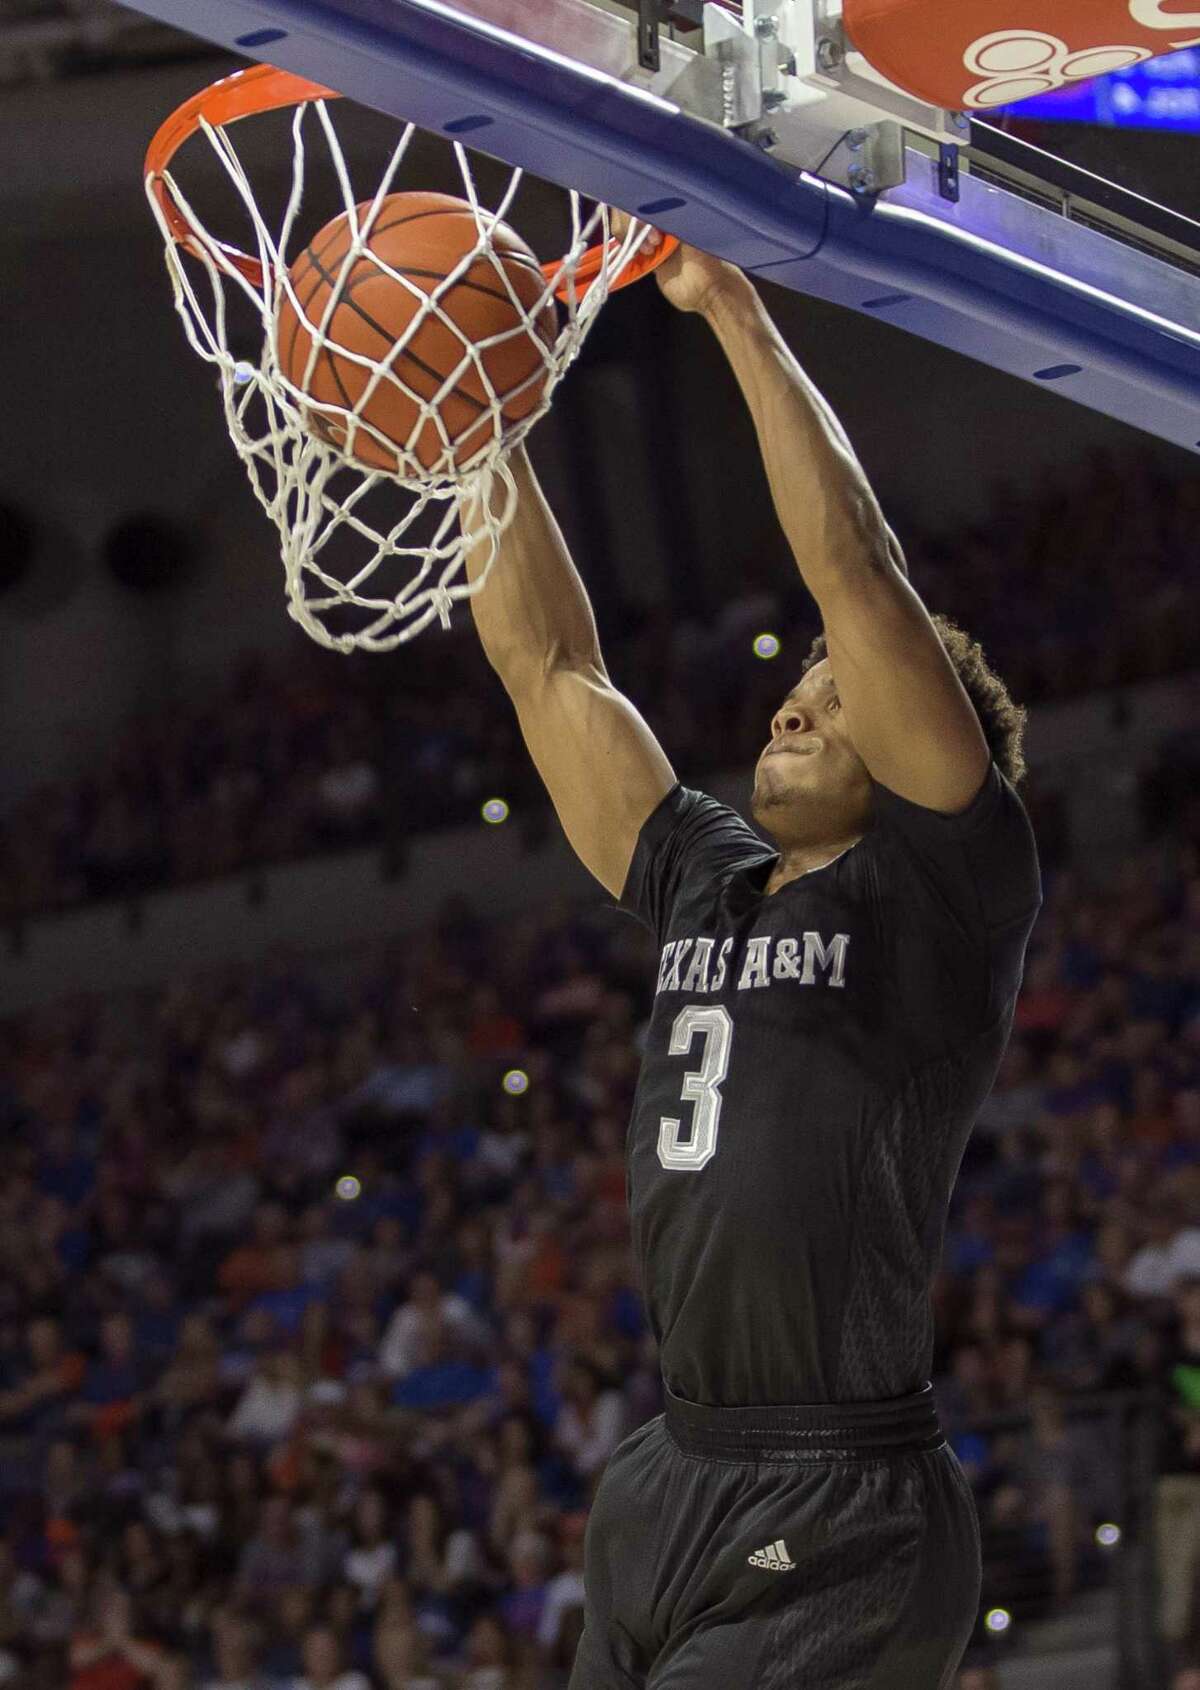 Texas A&M guard Admon Gilder dunks during the first half against Florida in Gainesville, Fla., on Feb. 11, 2017.